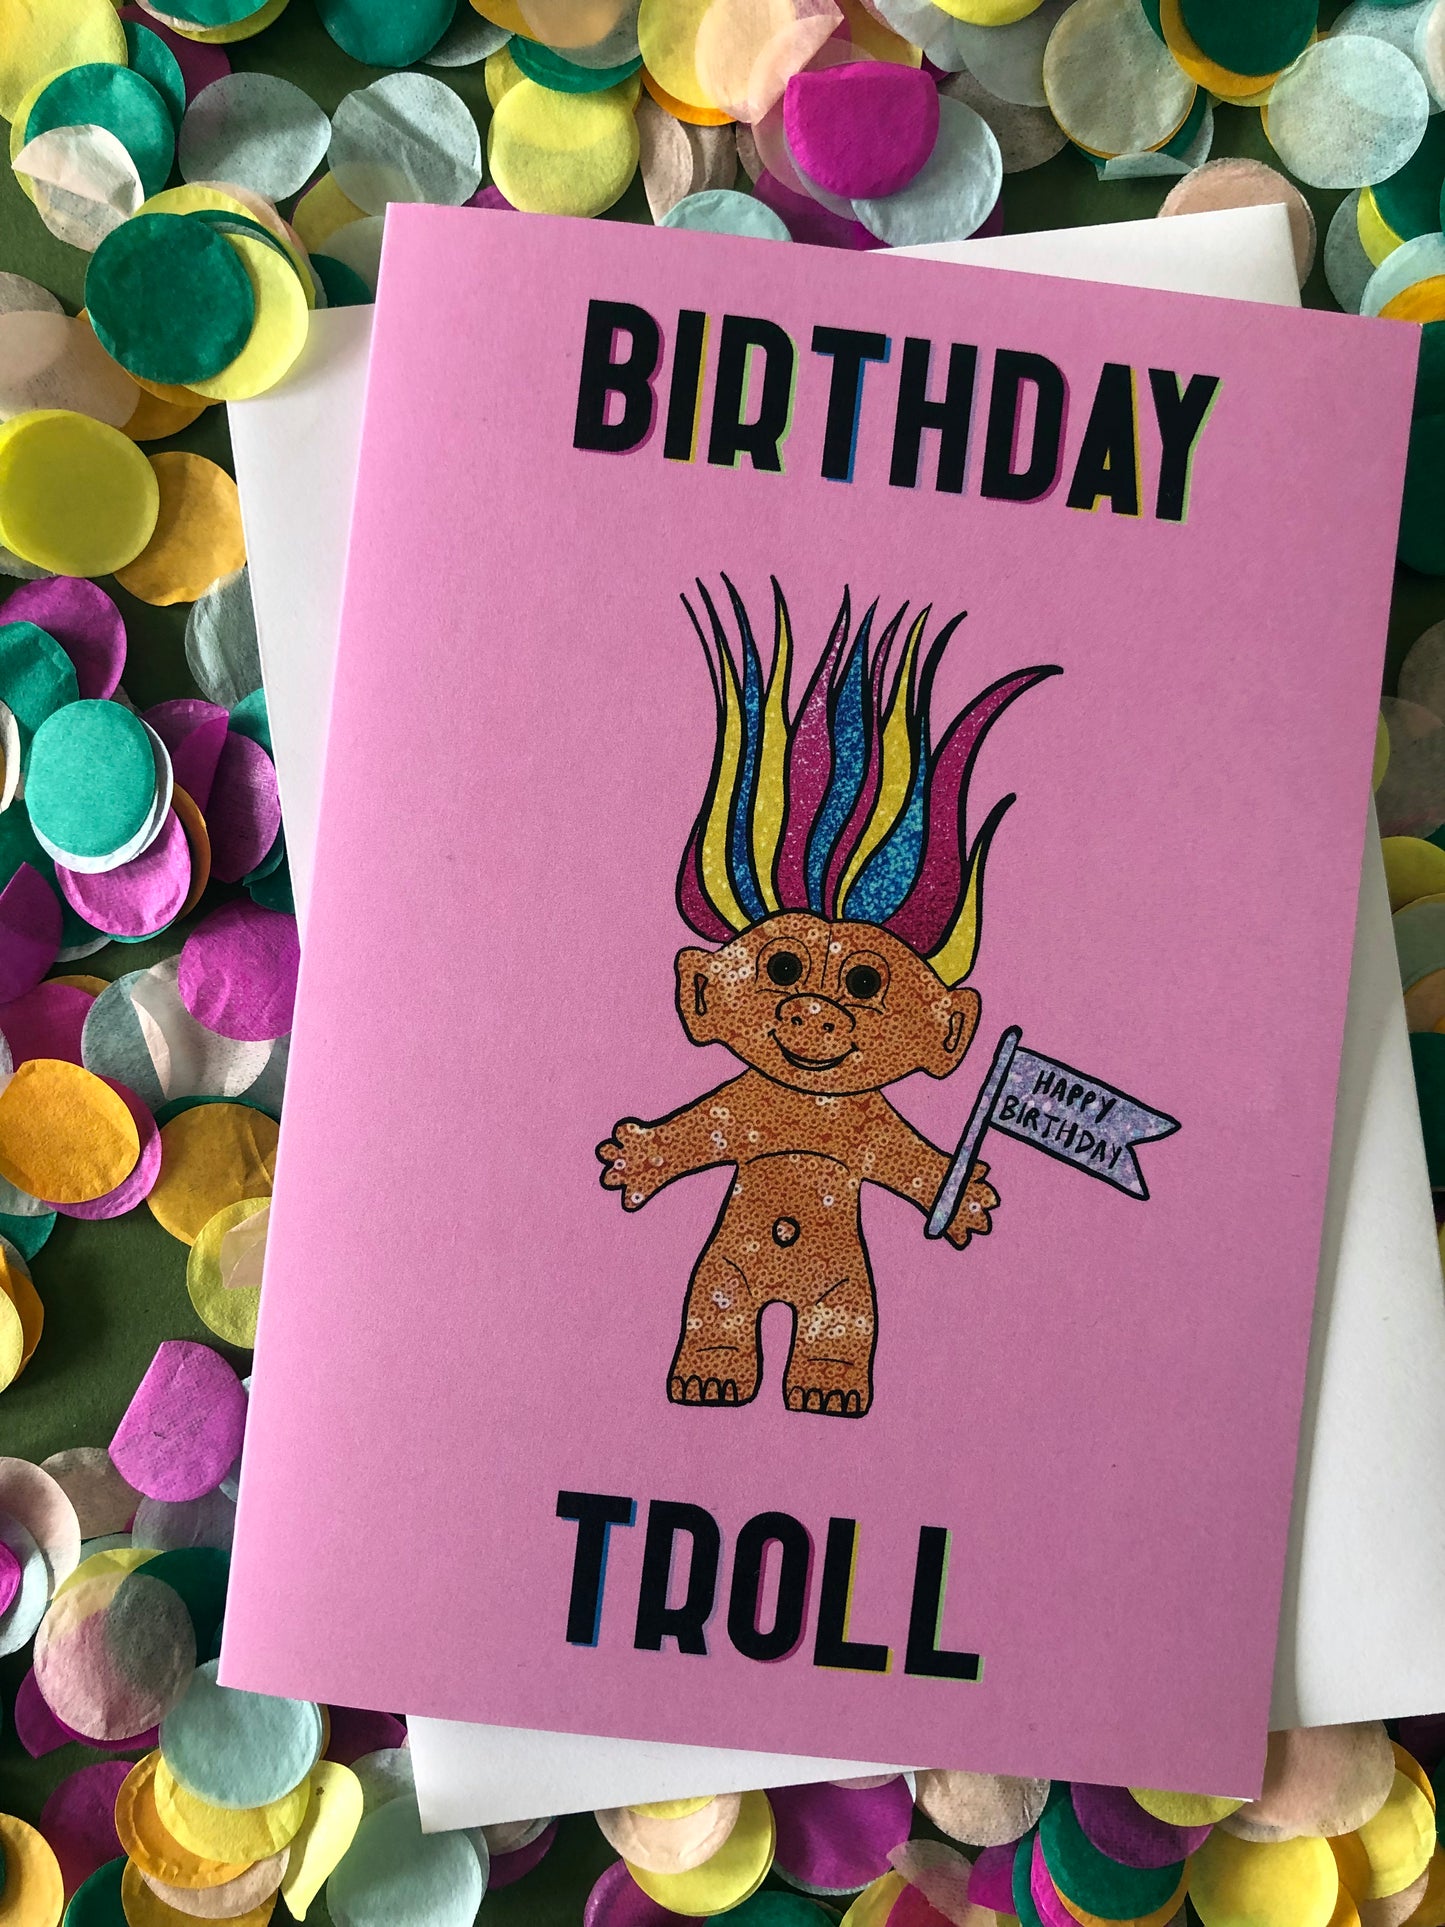 Pink Birthday Card featuring an illustration of a nineties troll doll